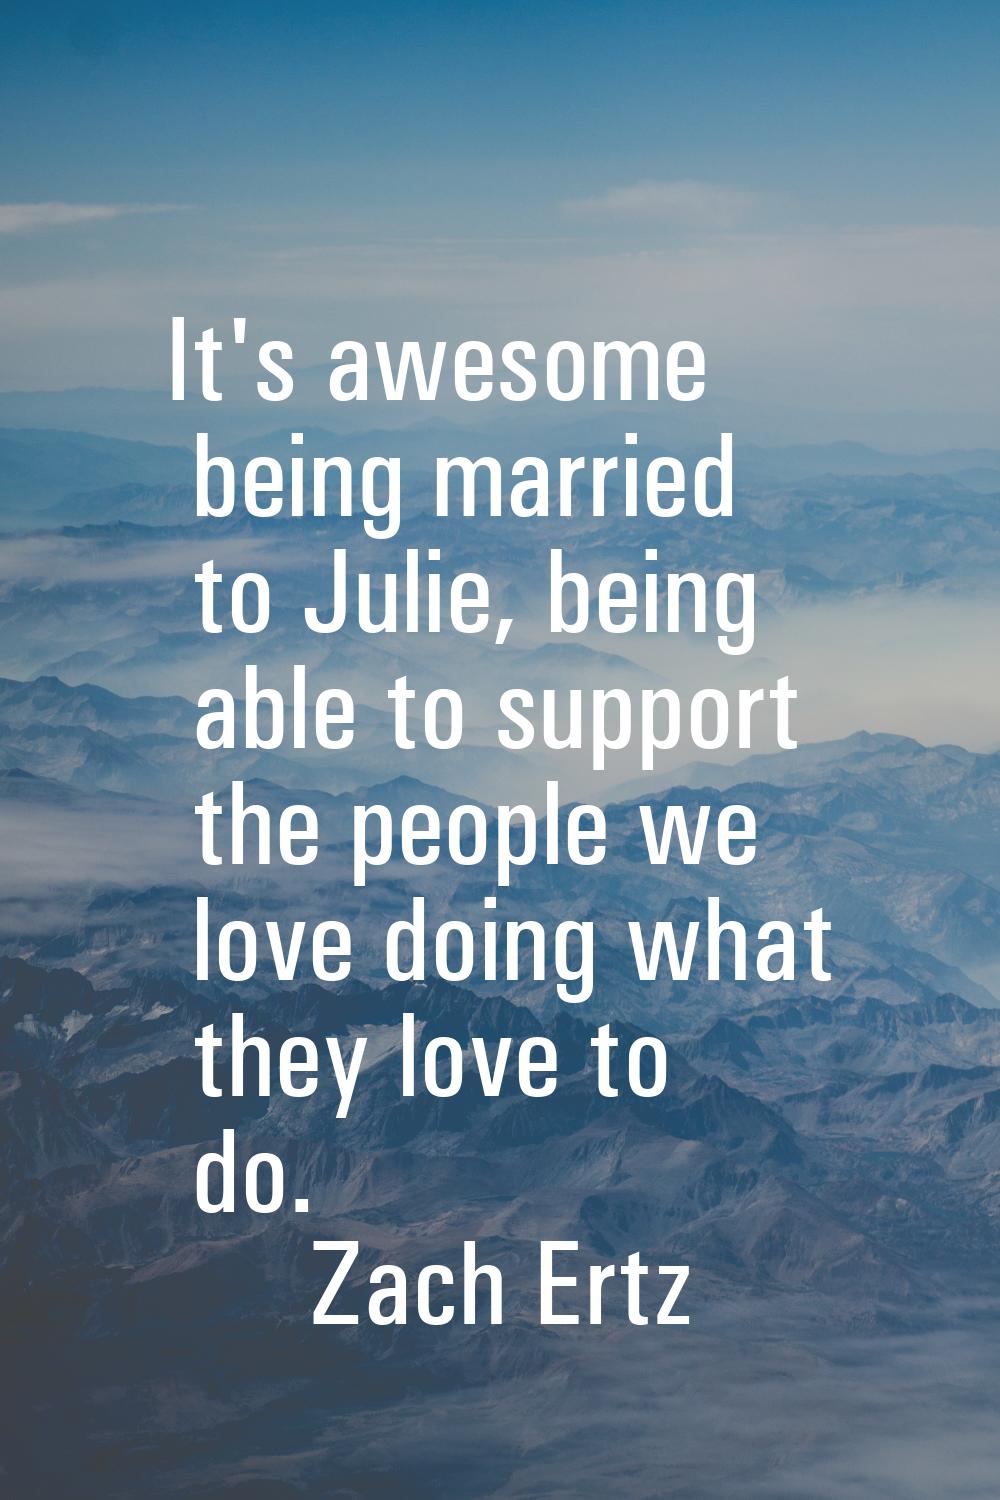 It's awesome being married to Julie, being able to support the people we love doing what they love 